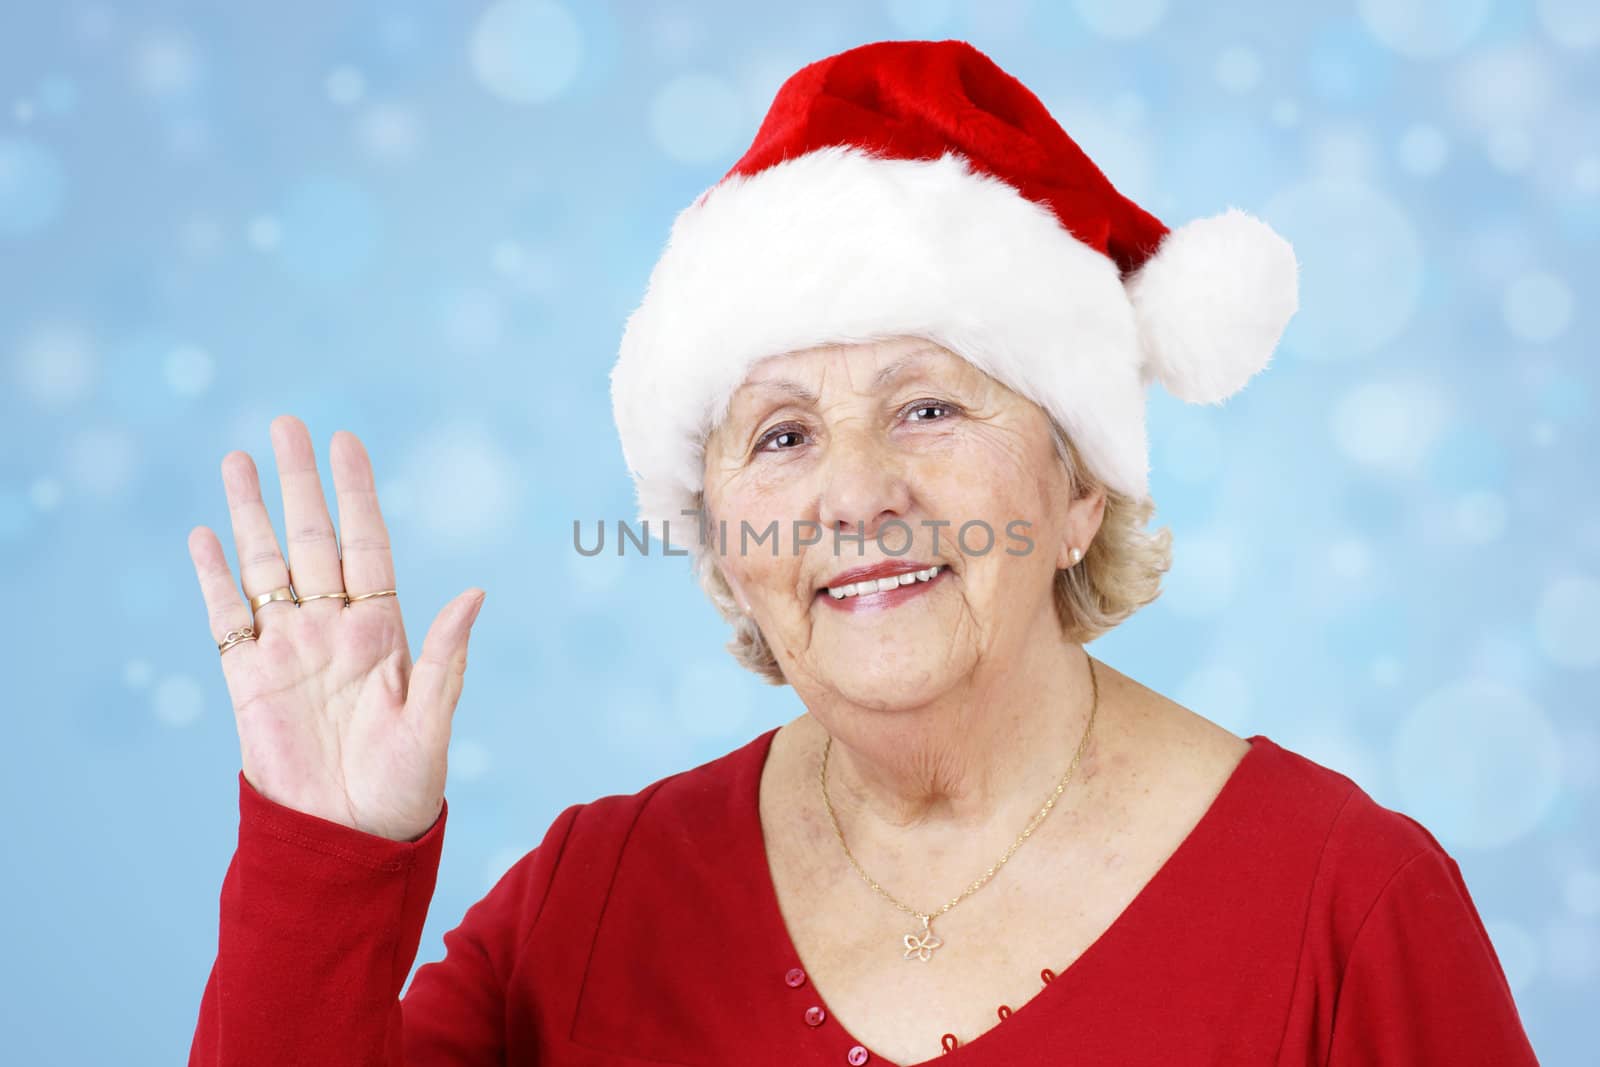 Grand-mother sending her love for Christmas by waving her hand while wearing Santa Claus hat over winter blue background